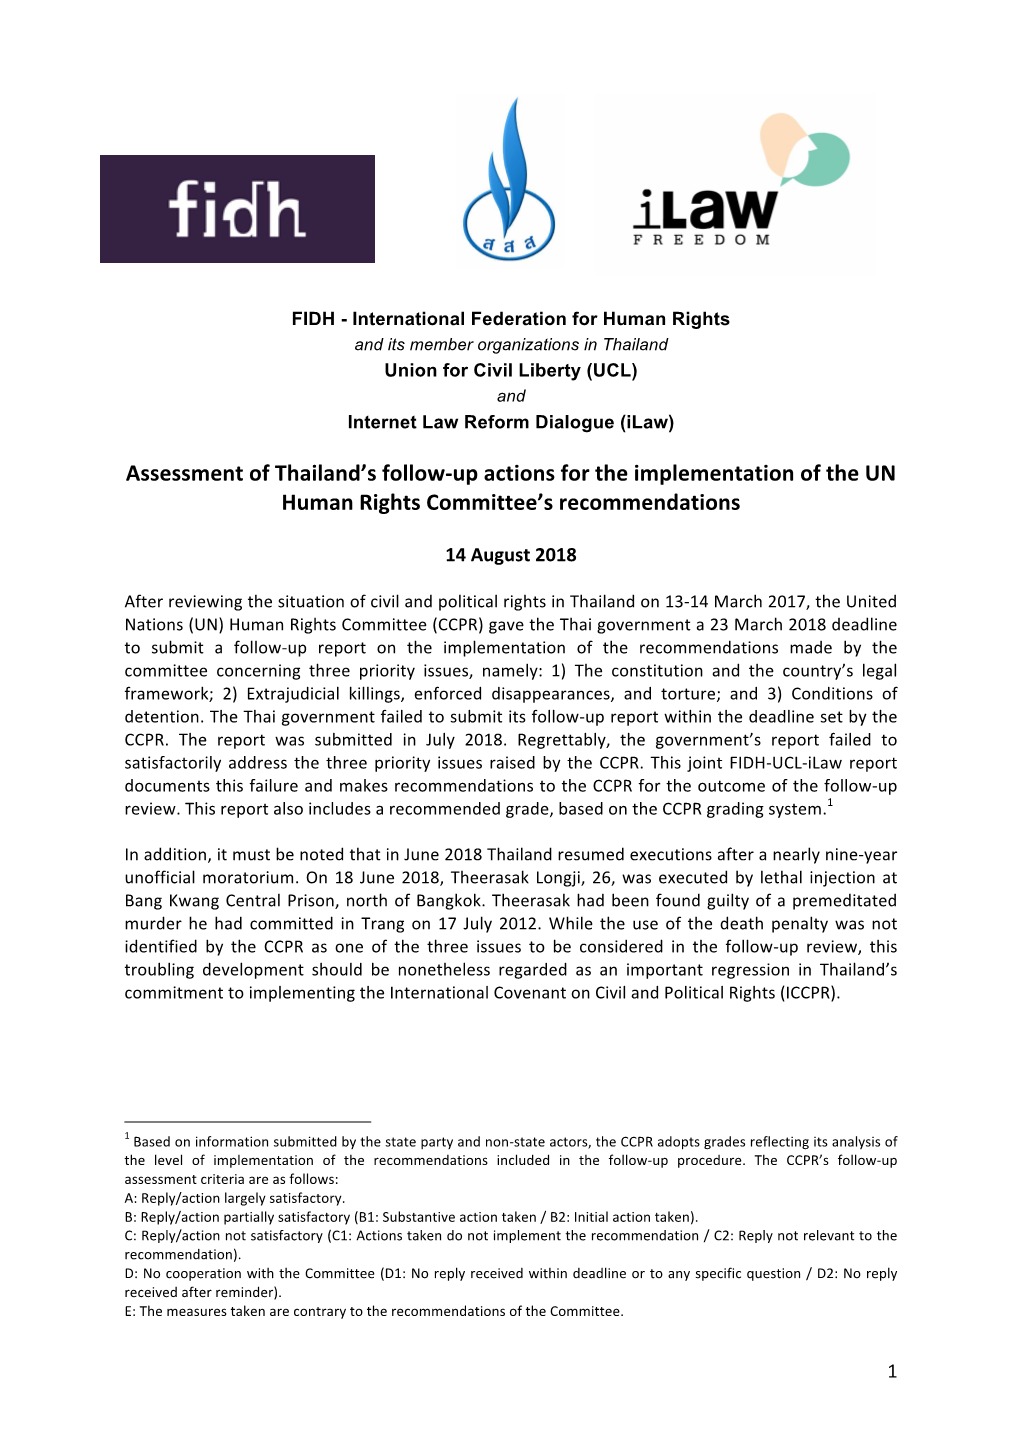 Assessment of Thailand's Follow-Up Actions for the Implementation Of